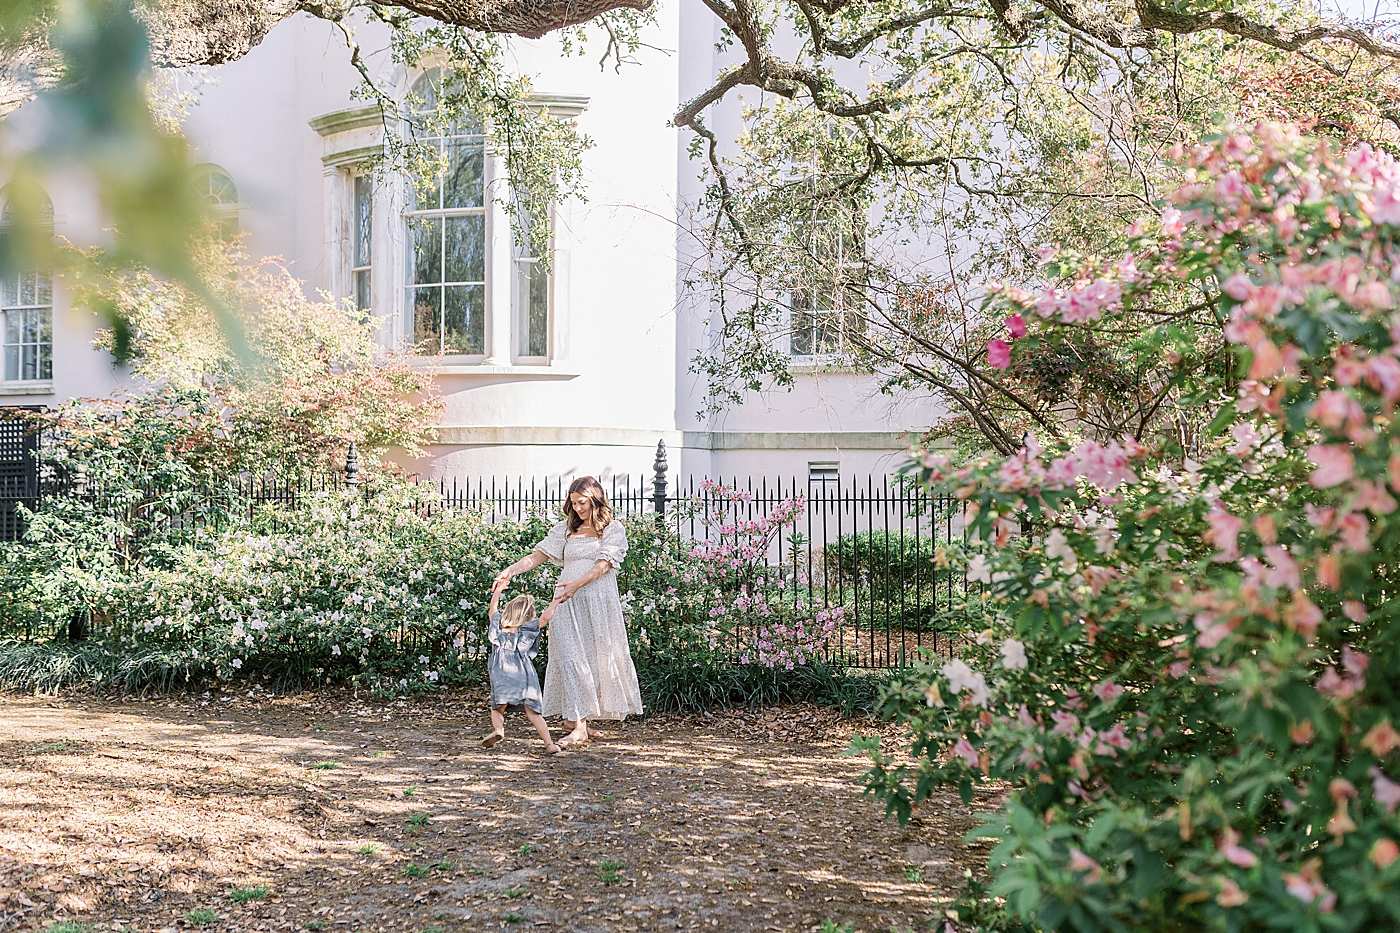 Expecting mother dancing with her daughter in a Charleston garden with an iron gate | Image by Caitlyn Motycka